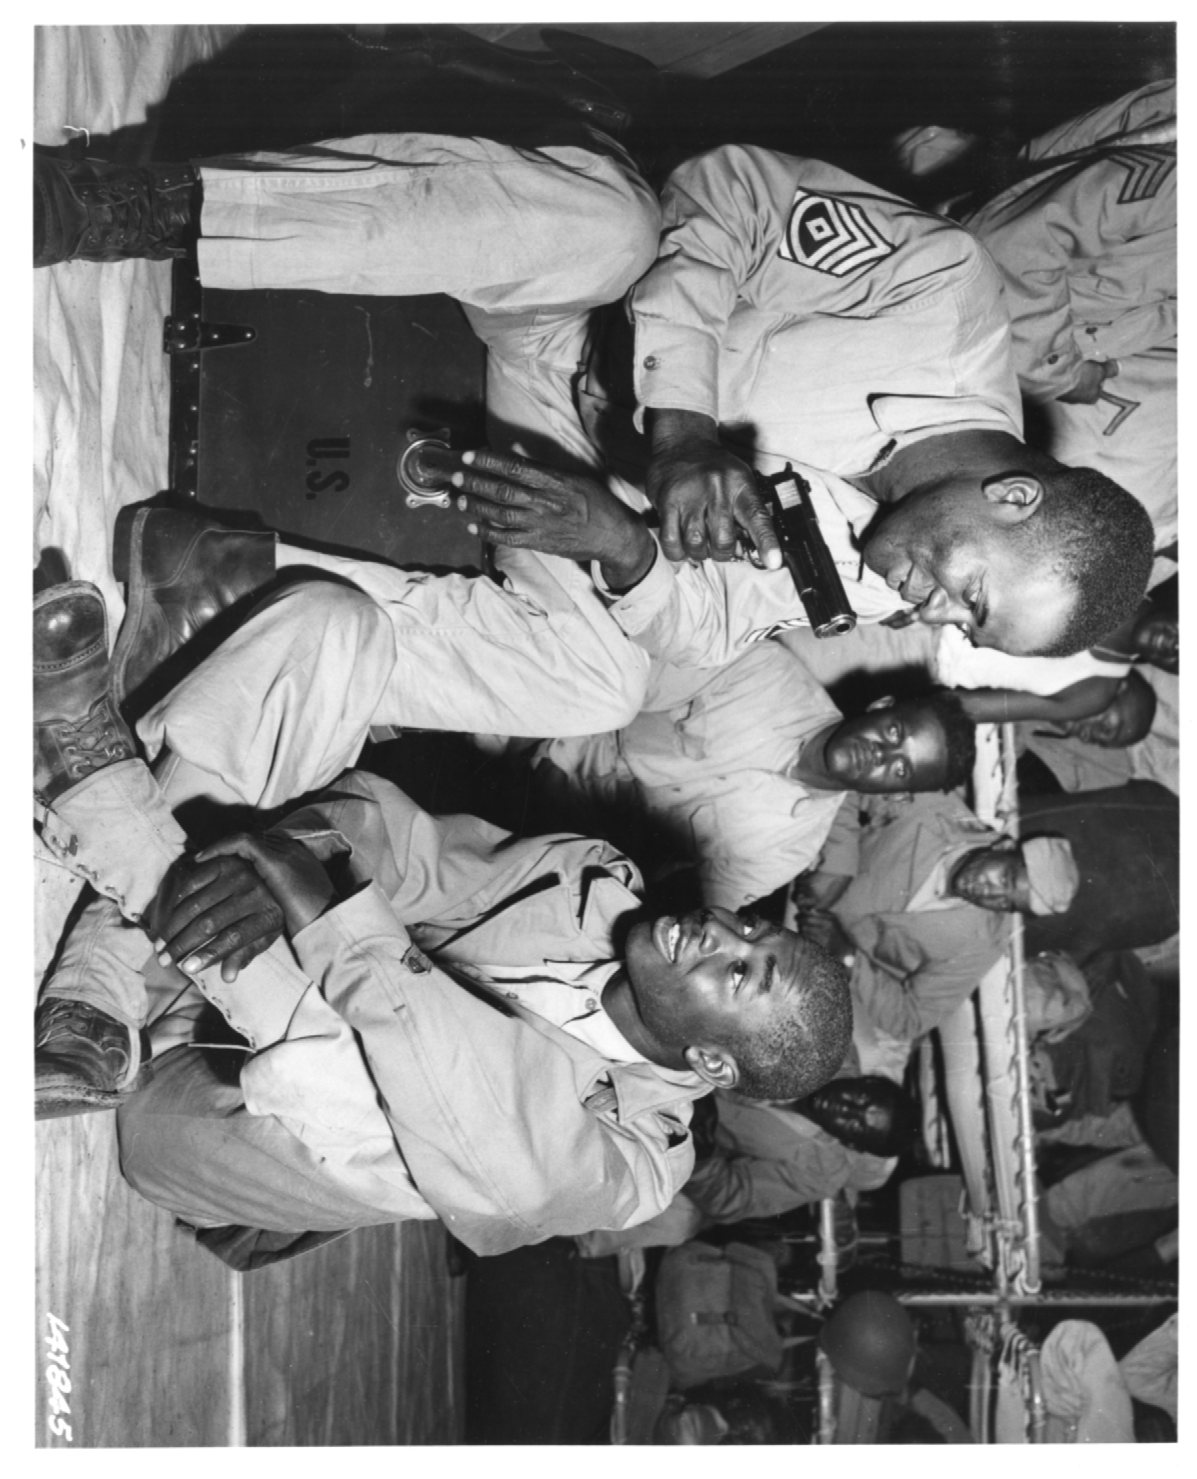 An image of First Sergeant James Sims shows Private John Stephens his .45. Both are soldiers of the 76th CA.